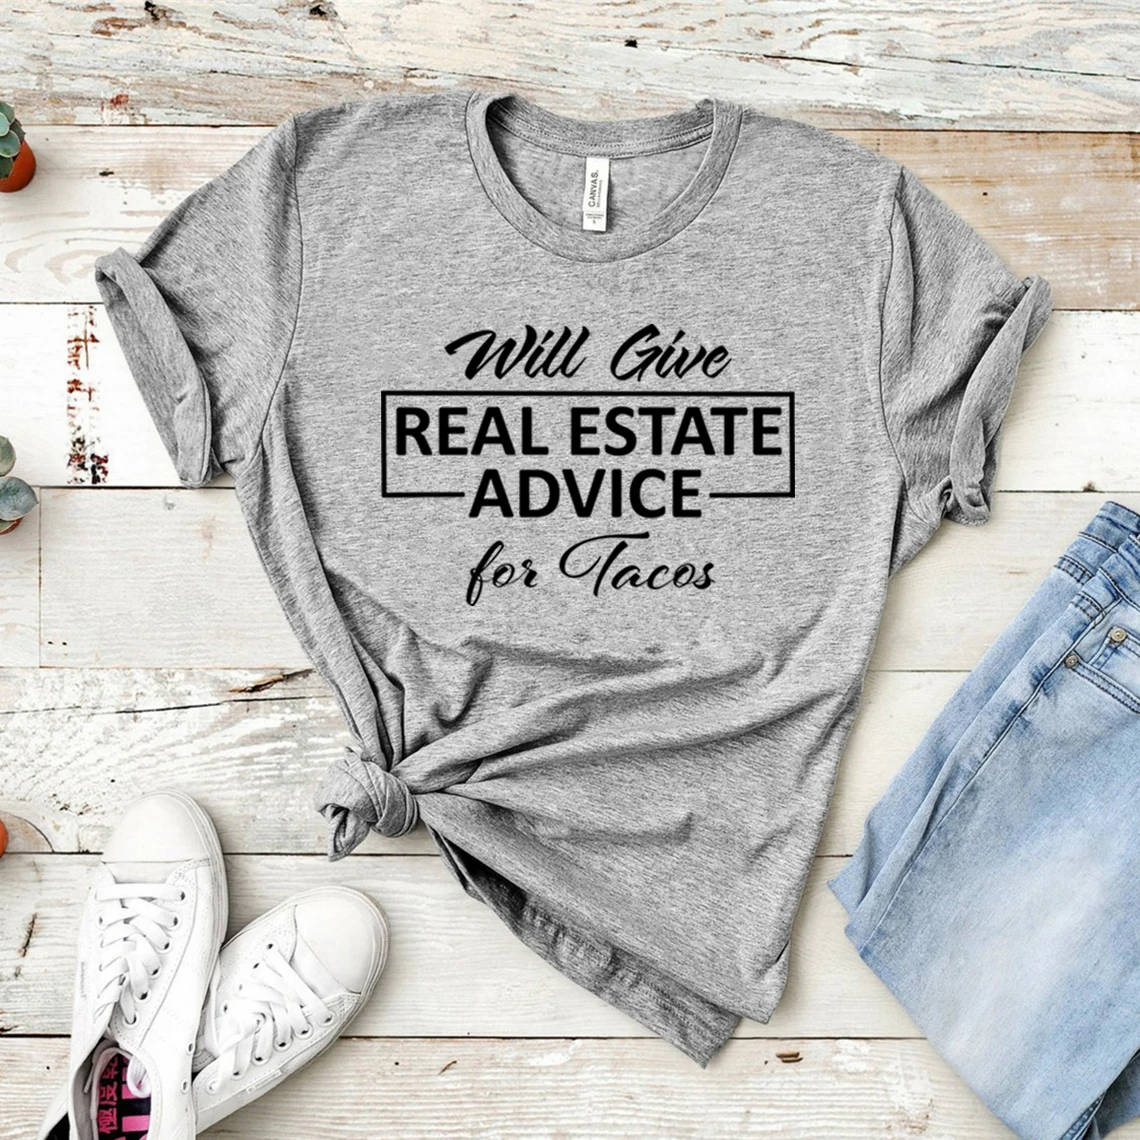 

Will Give Real Estate Advice for Tacos T Shirt Funny Realtor T-Shirt Real Estate Agent Gift Unisex Graphic T Shirts Casual Tops